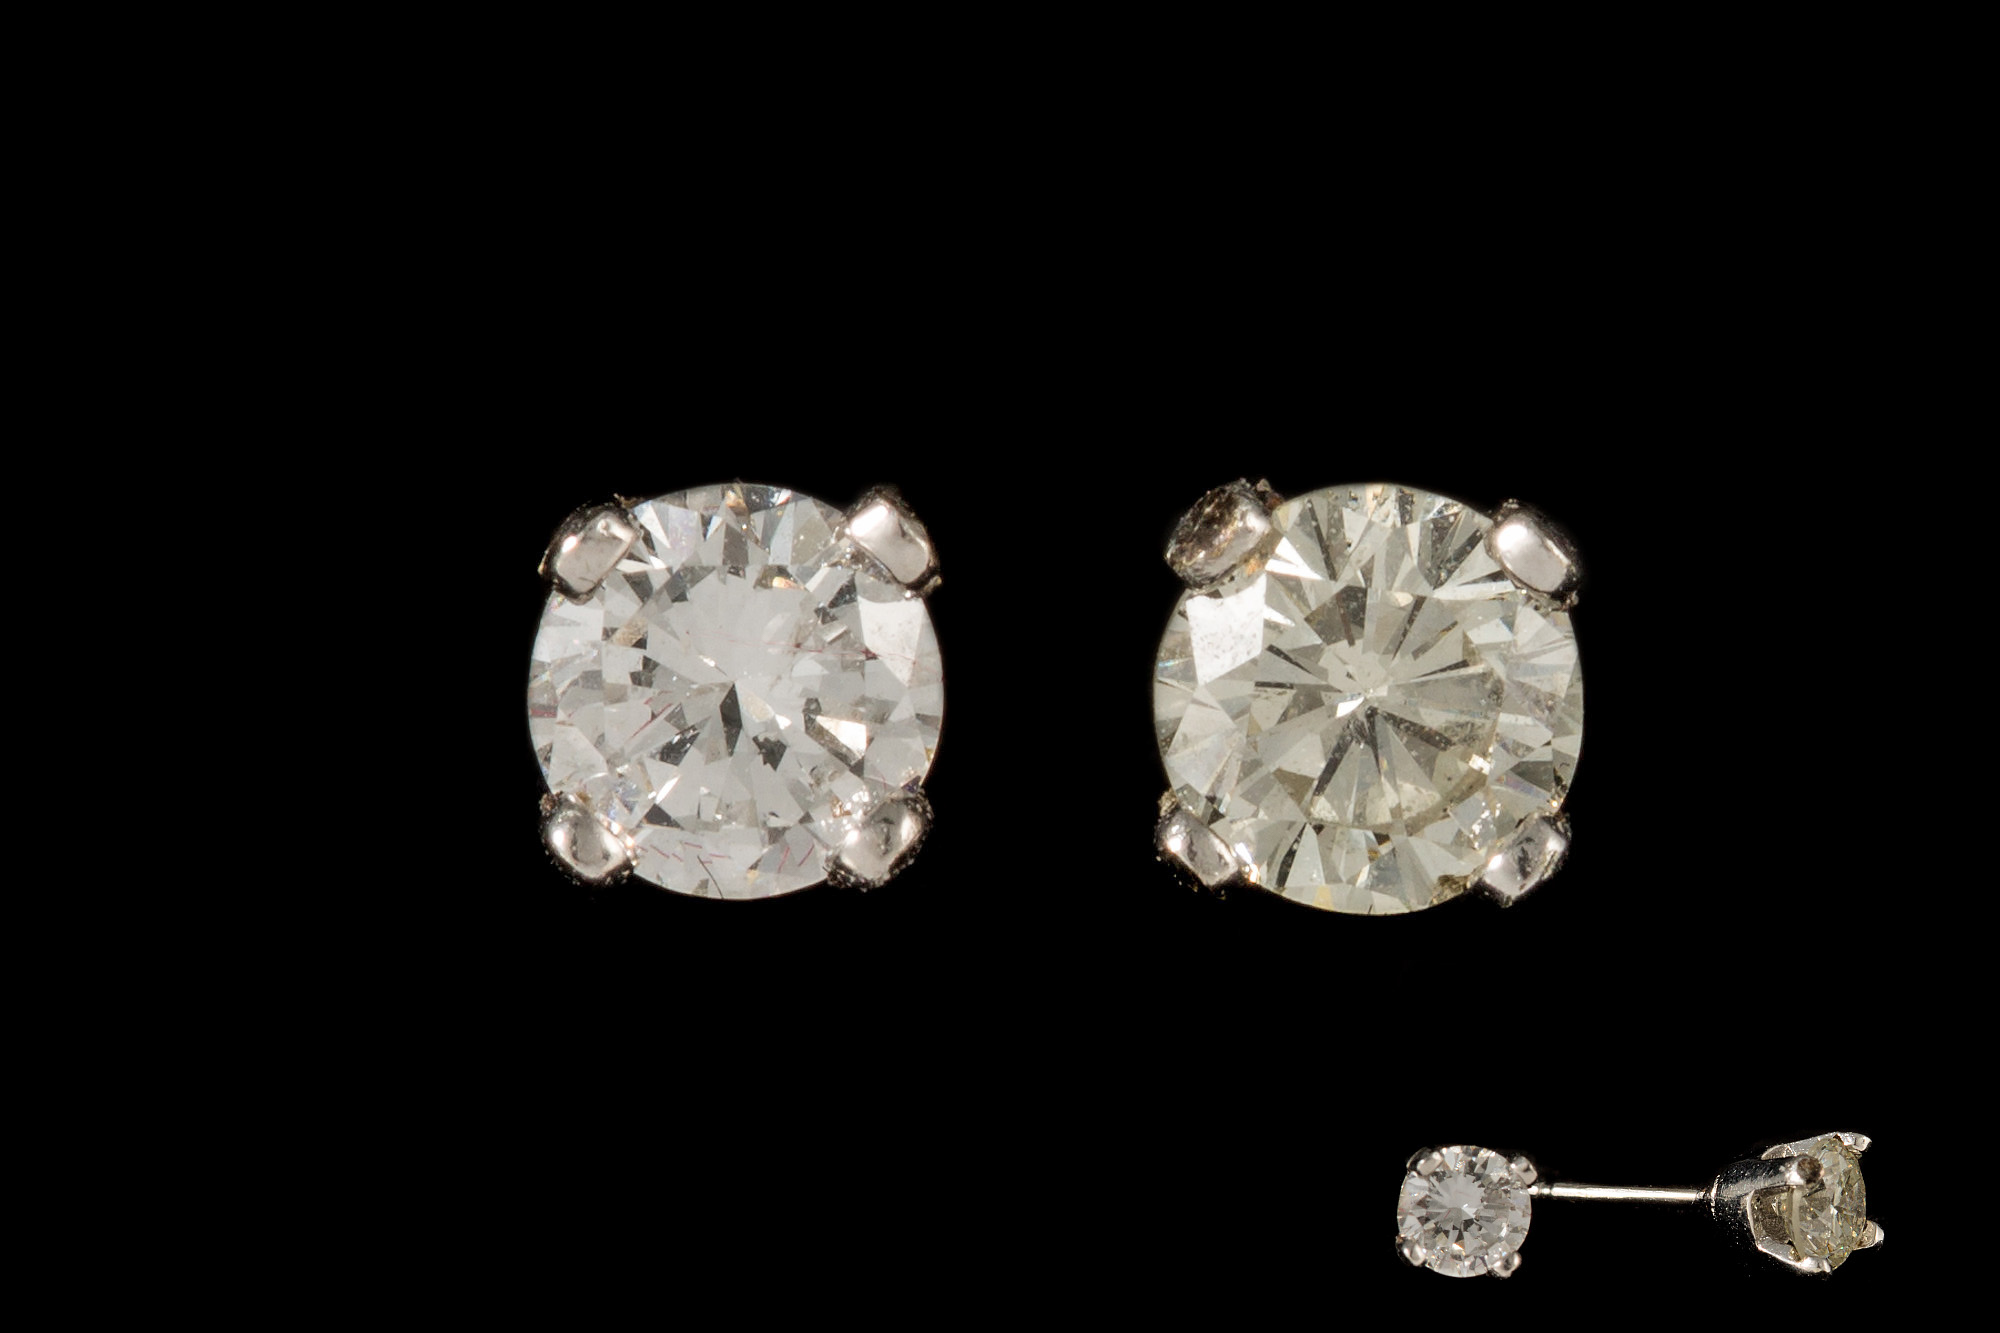 A PAIR OF DIAMOND STUD EARRINGS, the brilliant cut diamonds mounted in white gold.